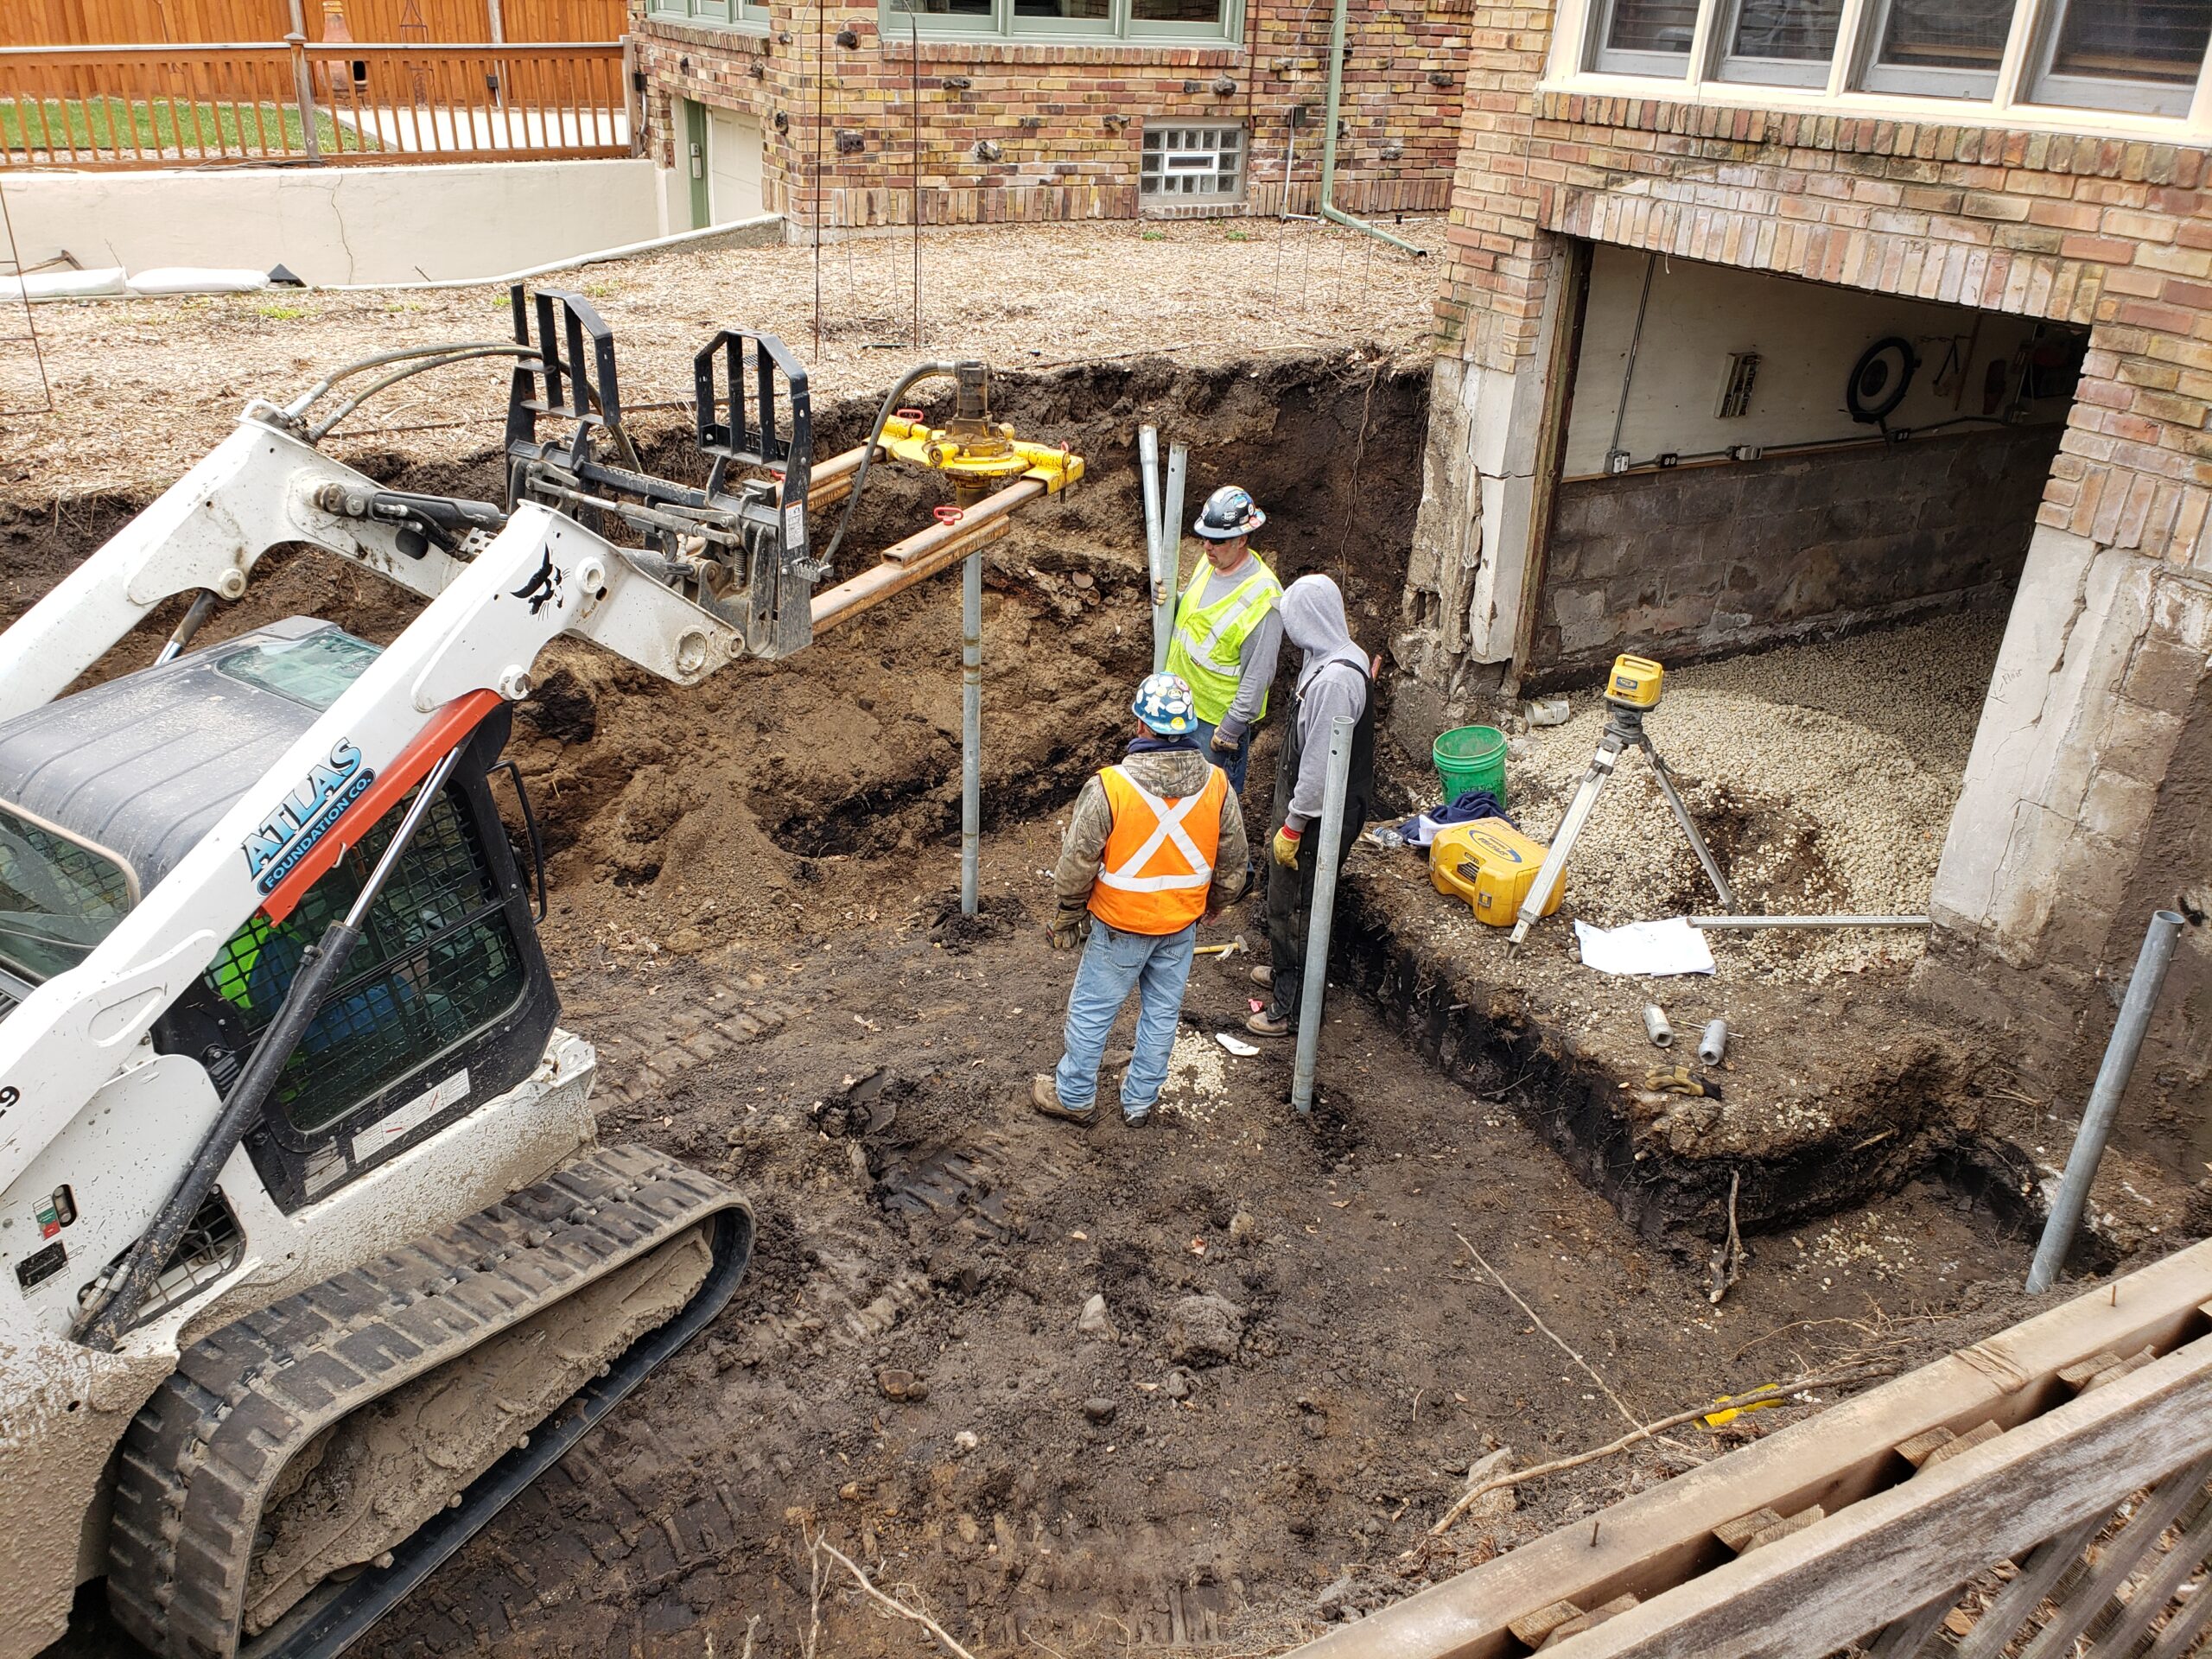 Hole digging and custom excavating projects for driveways, foundations, garages, pools and other commercial and residential applications and properties in the Twin Cities metro area.